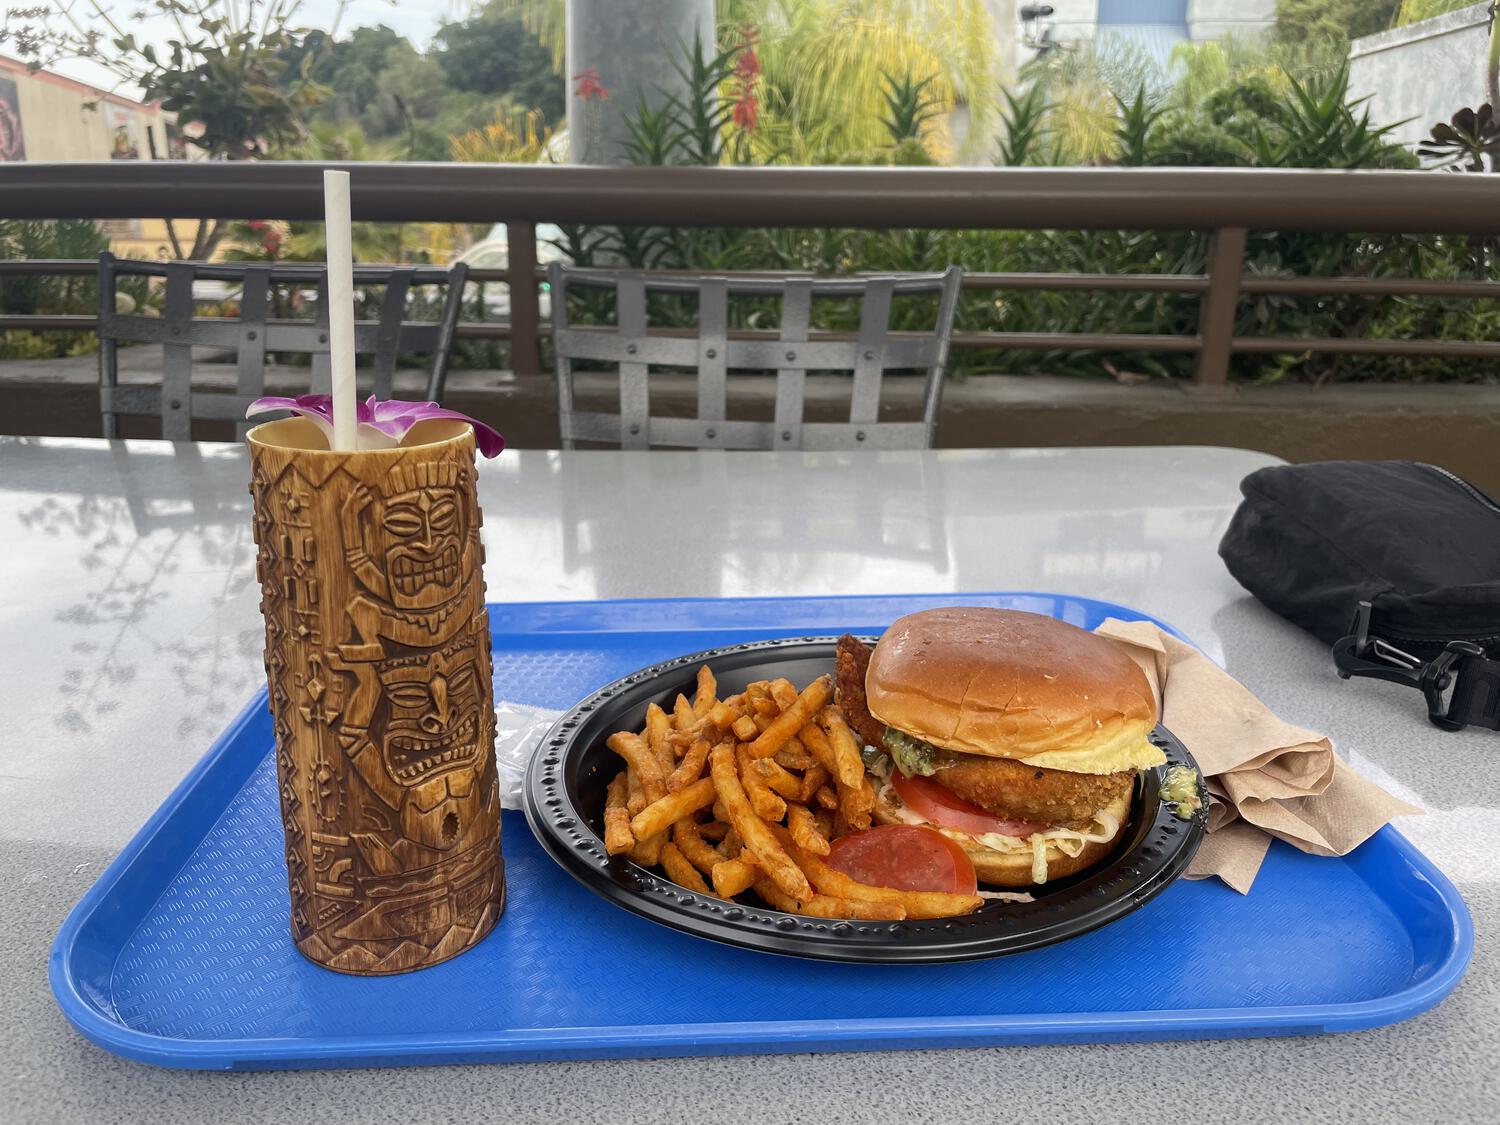 A chicken sandwich and fries with a tall tiki cocktail, all on an outdoor table with foliage and soundstages in the background